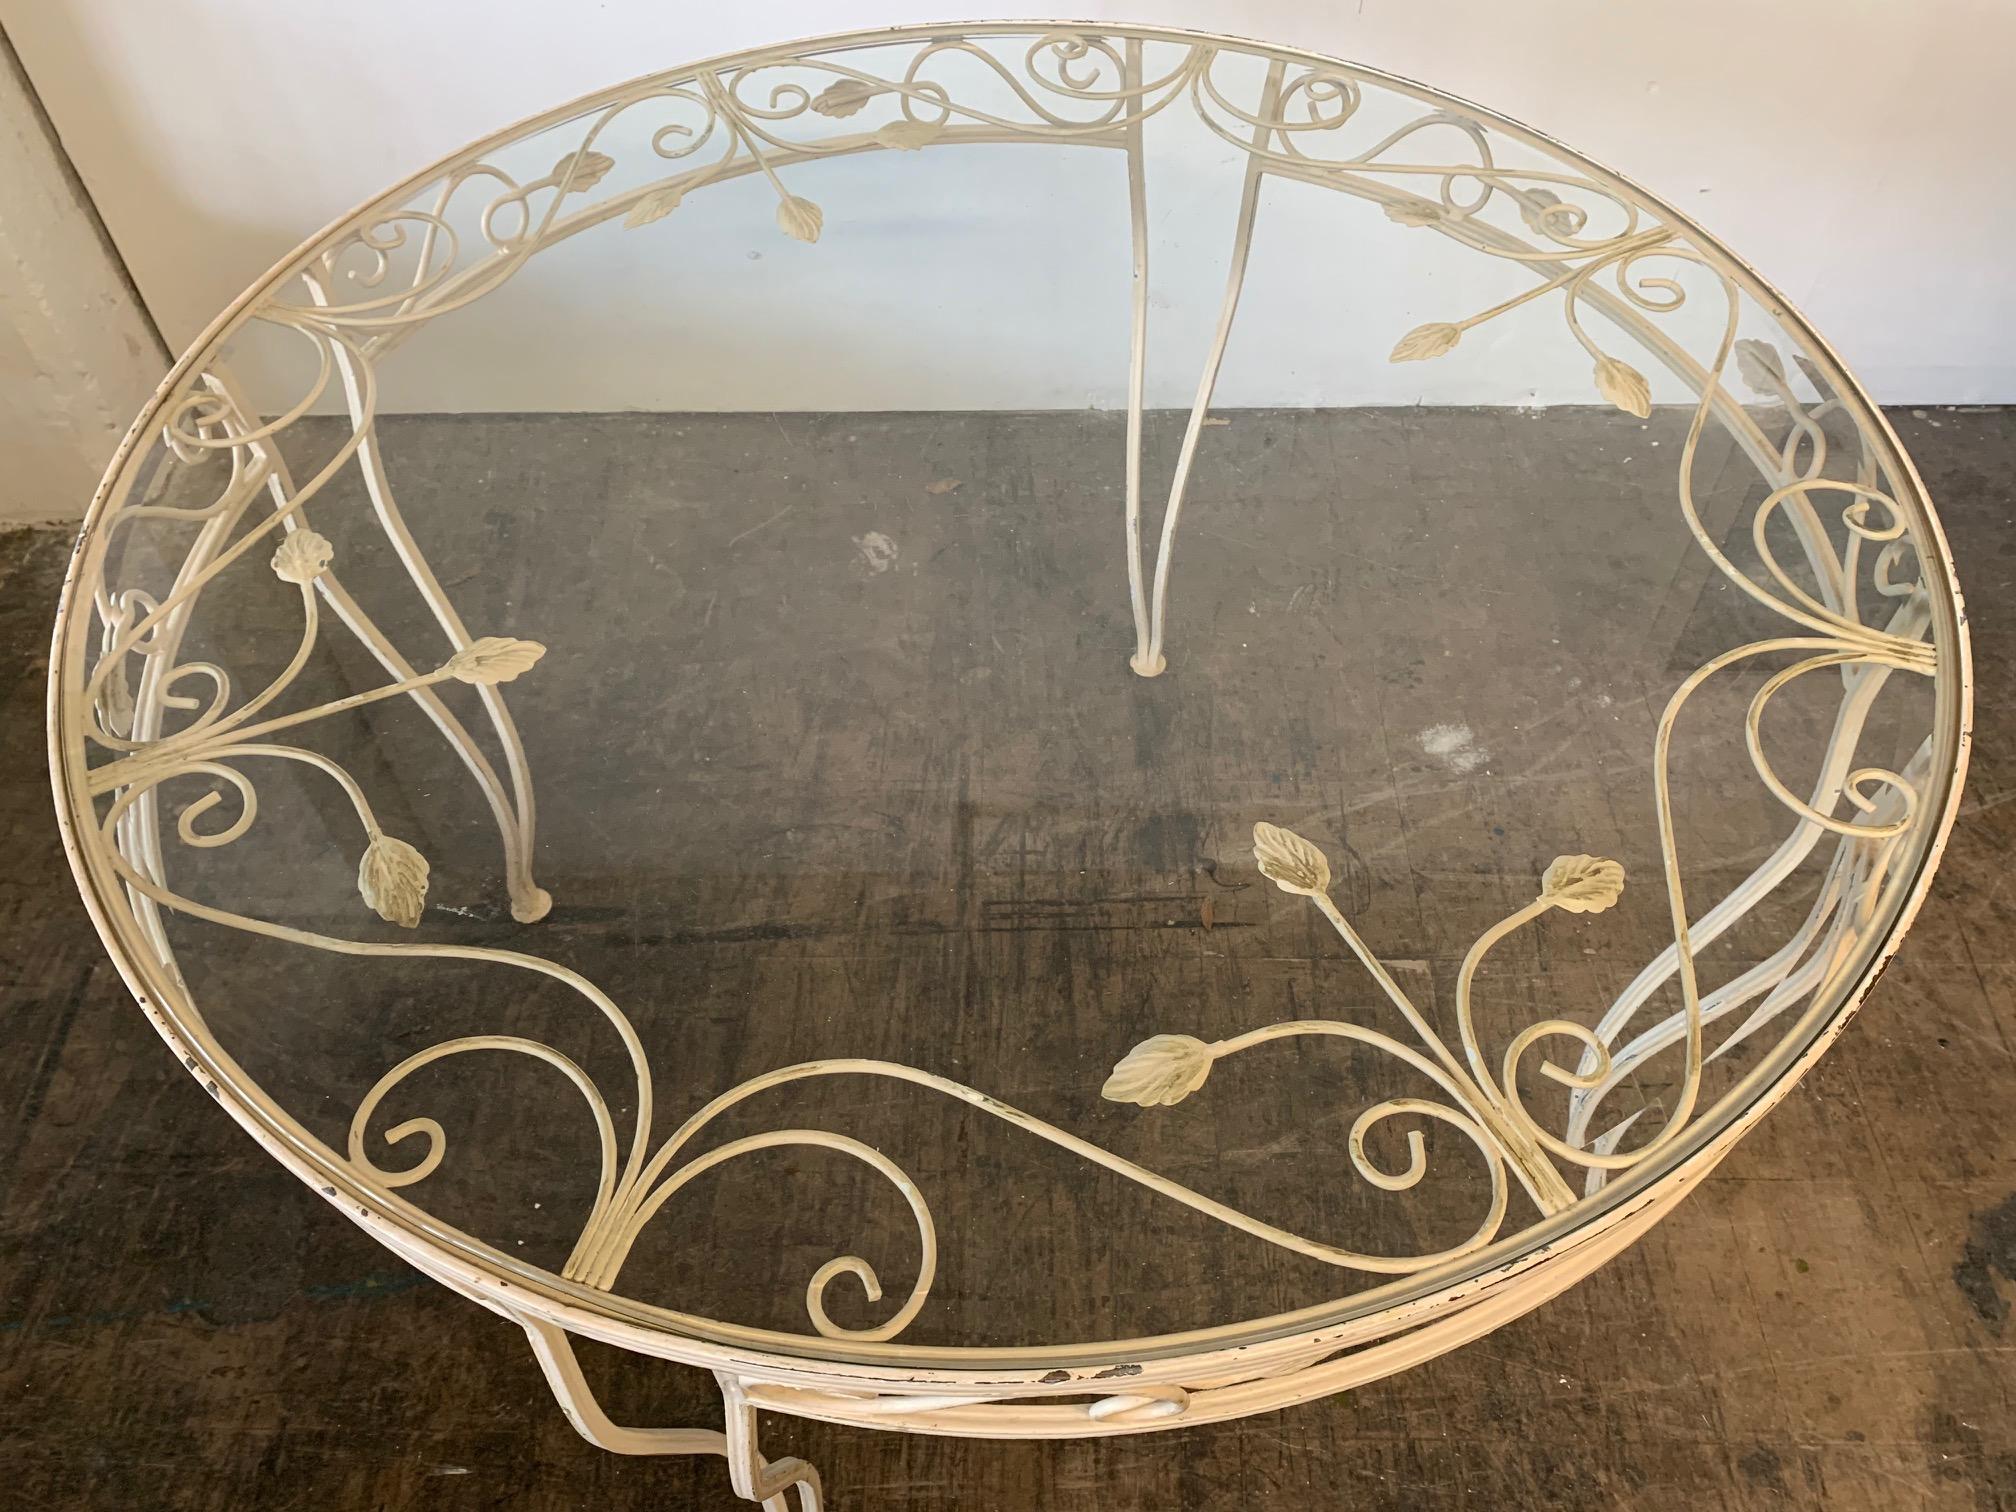 Vintage wrought iron patio table features leaf motif detailing and glass top. Good vintage condition with some paint loss to original finish.
Measures: 42.5